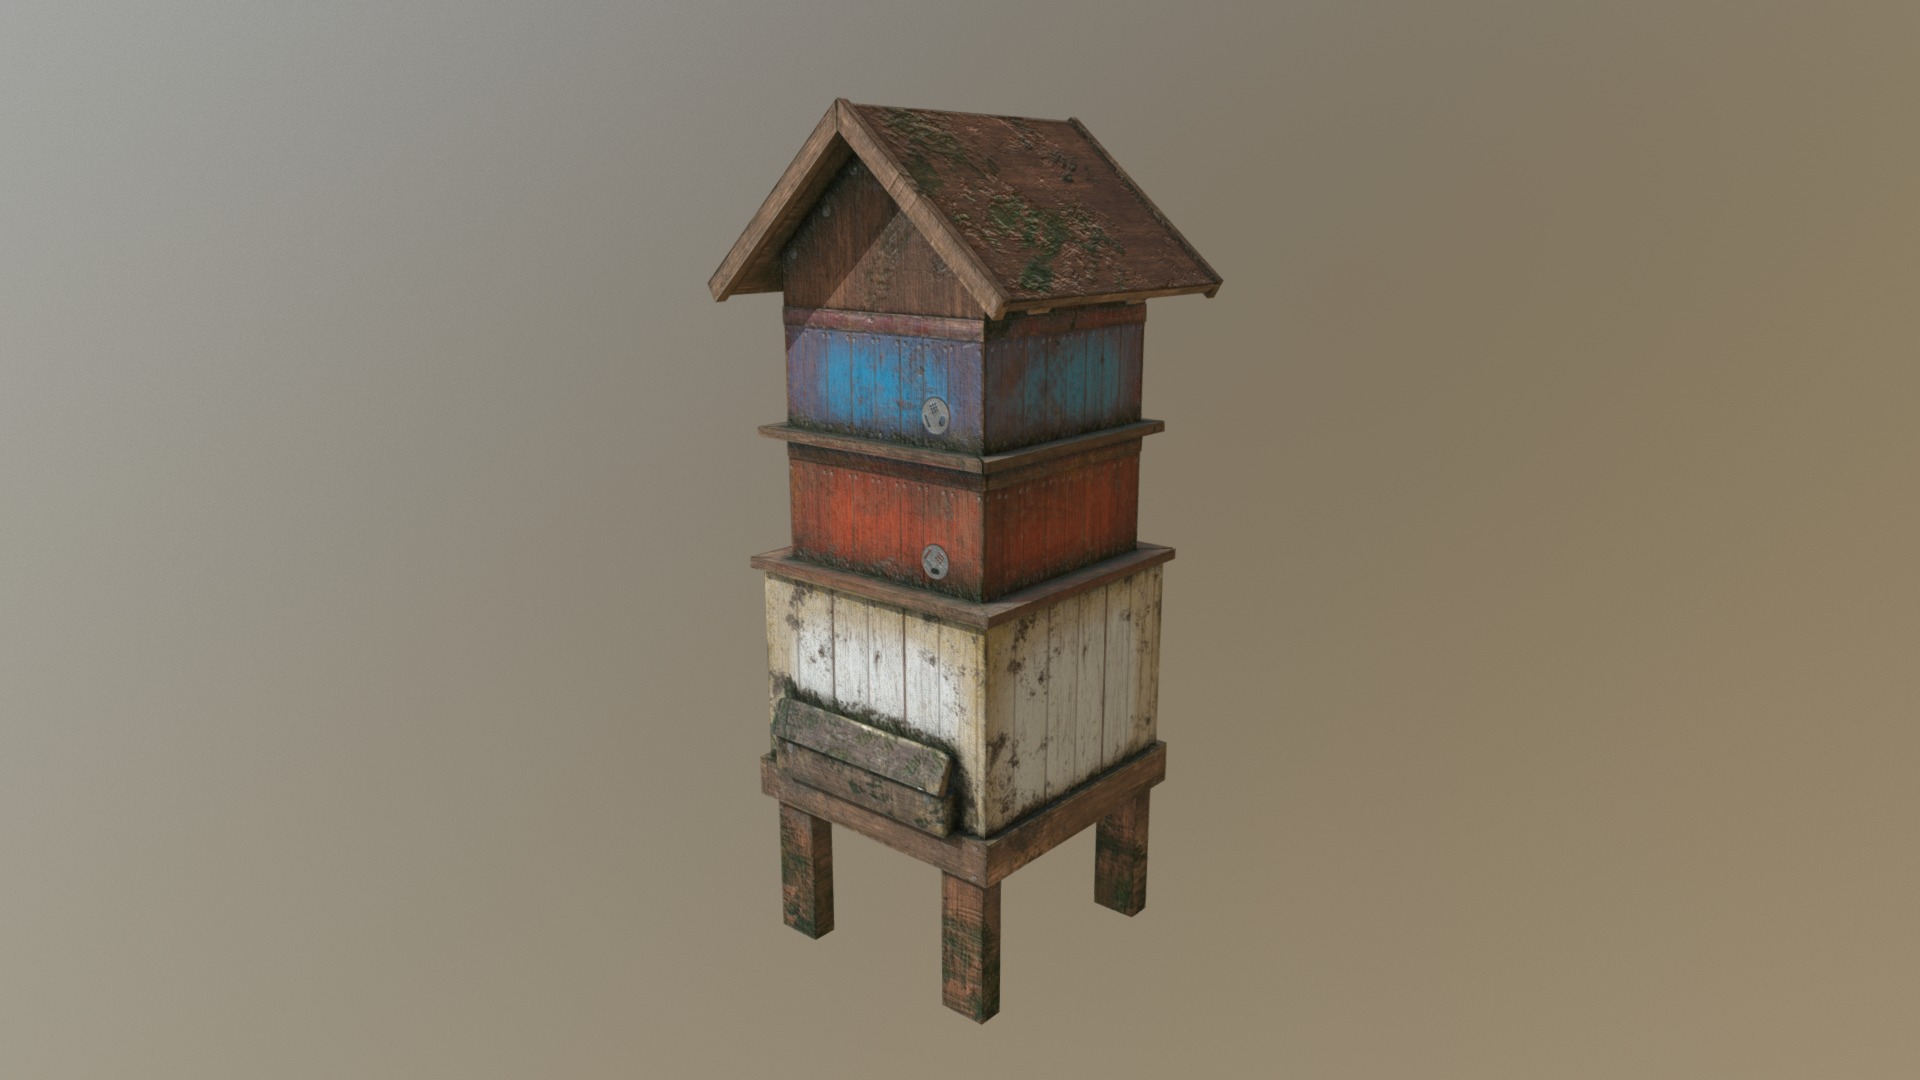 3D model LOW POLY Rustic Bee Hive - This is a 3D model of the LOW POLY Rustic Bee Hive. The 3D model is about a small wooden birdhouse.